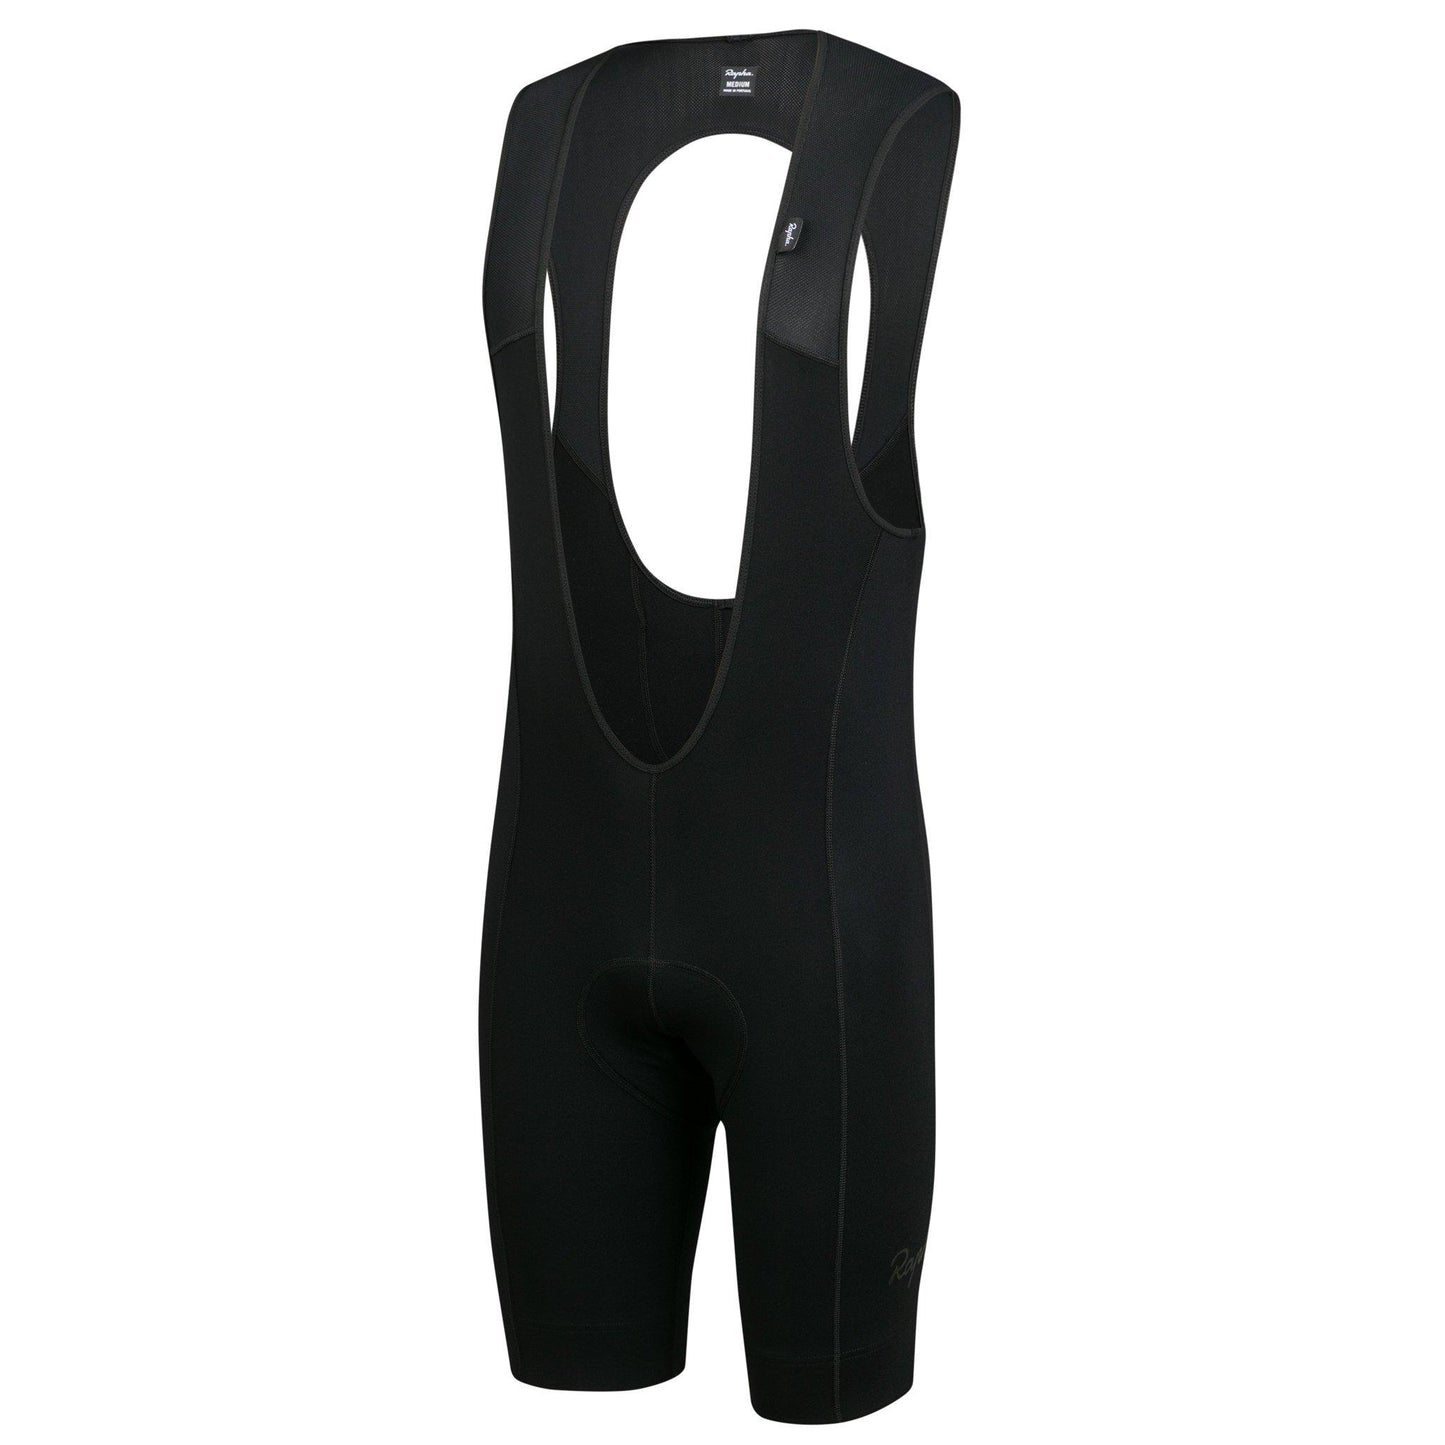 Rapha Mens Classic Bib Shorts - Black/Black buy online at Woolys Wheels and receive free delivery